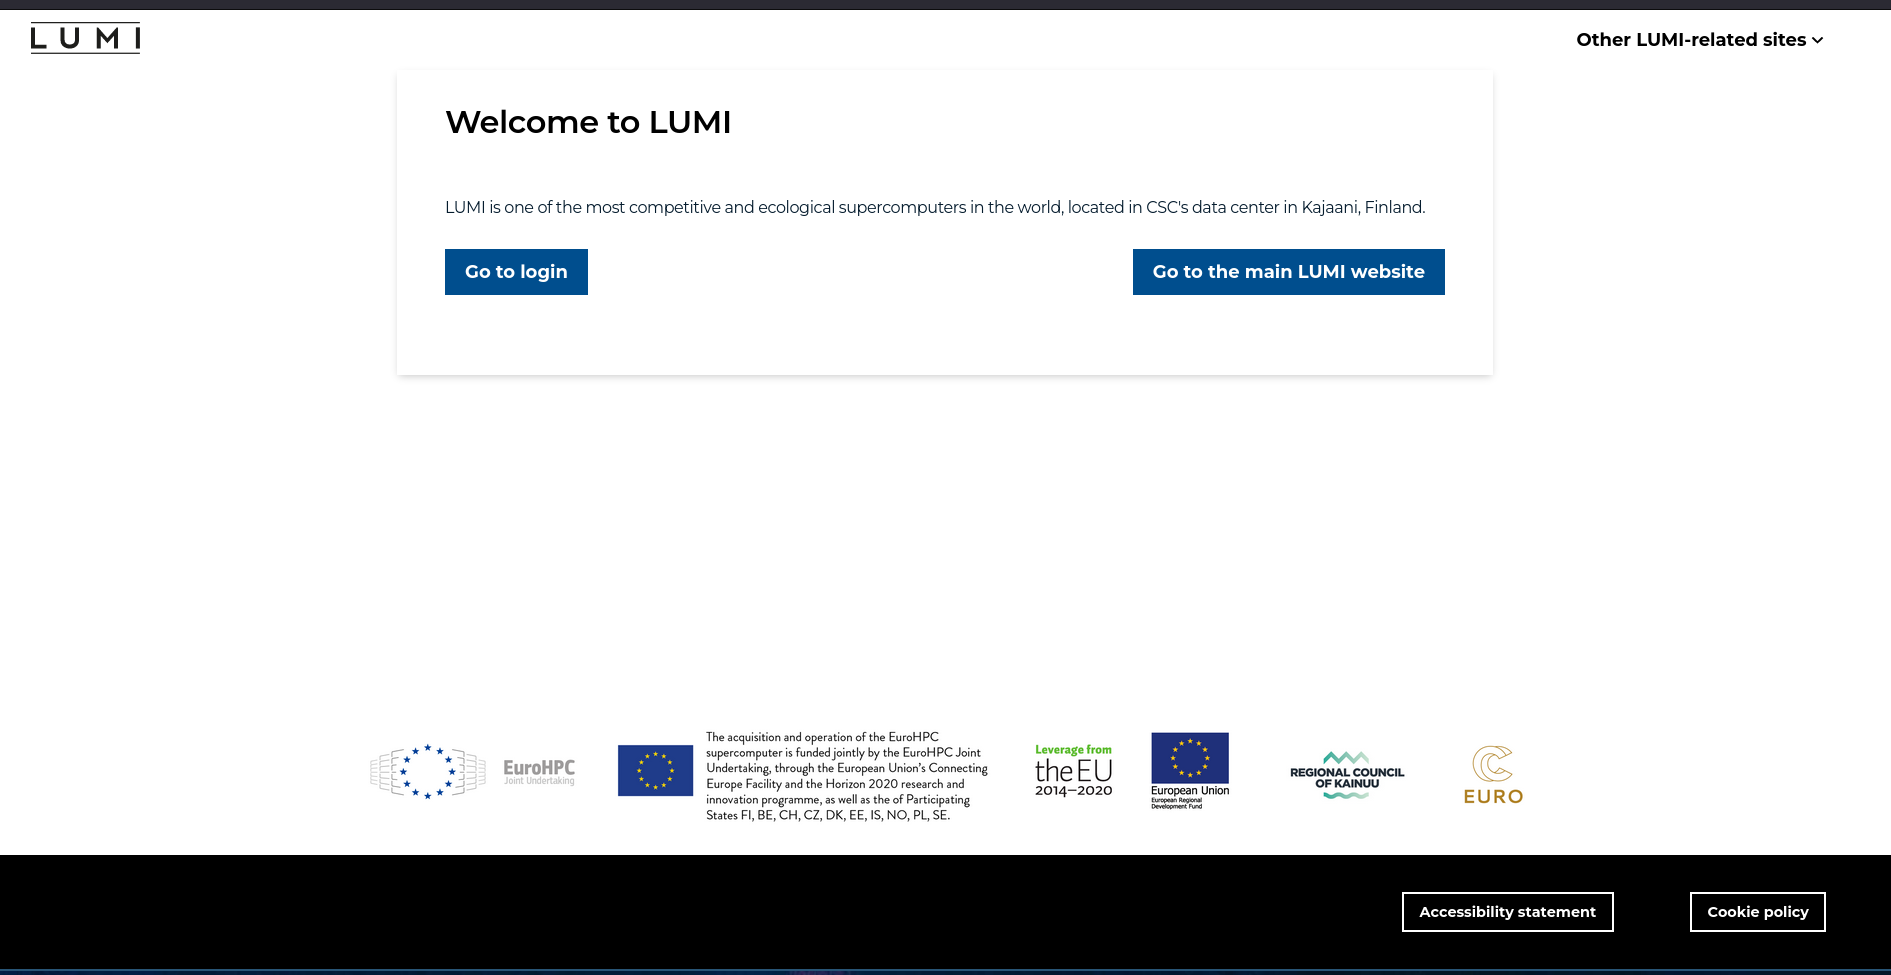 Image of welcome page for the LUMI web interface